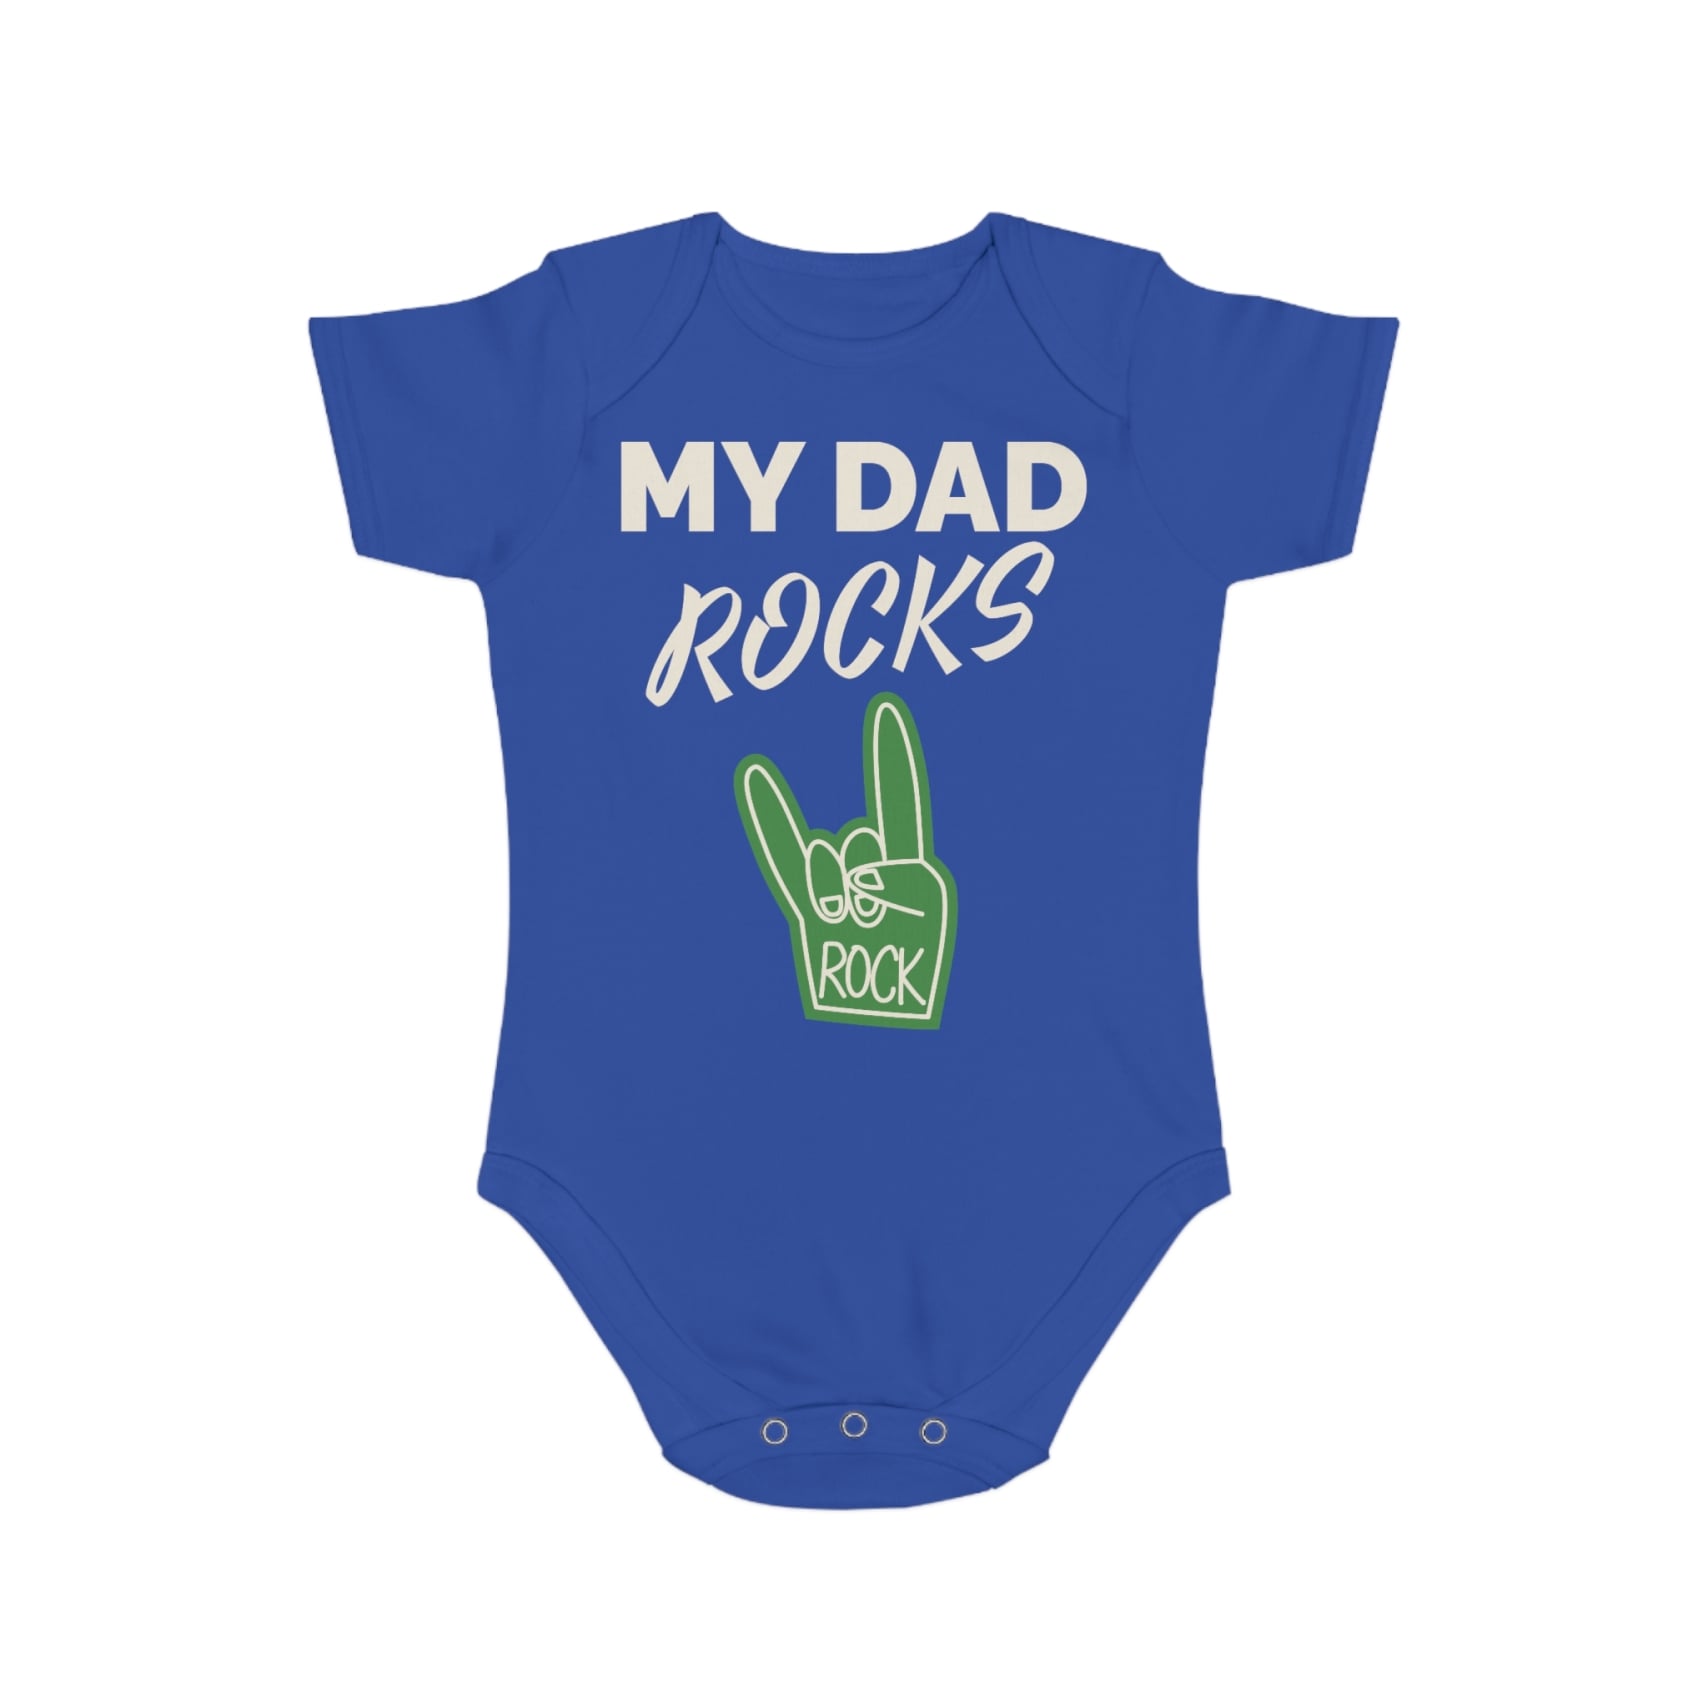 Blue infant bodysuit with the text “My Dad Rocks” printed on the front.